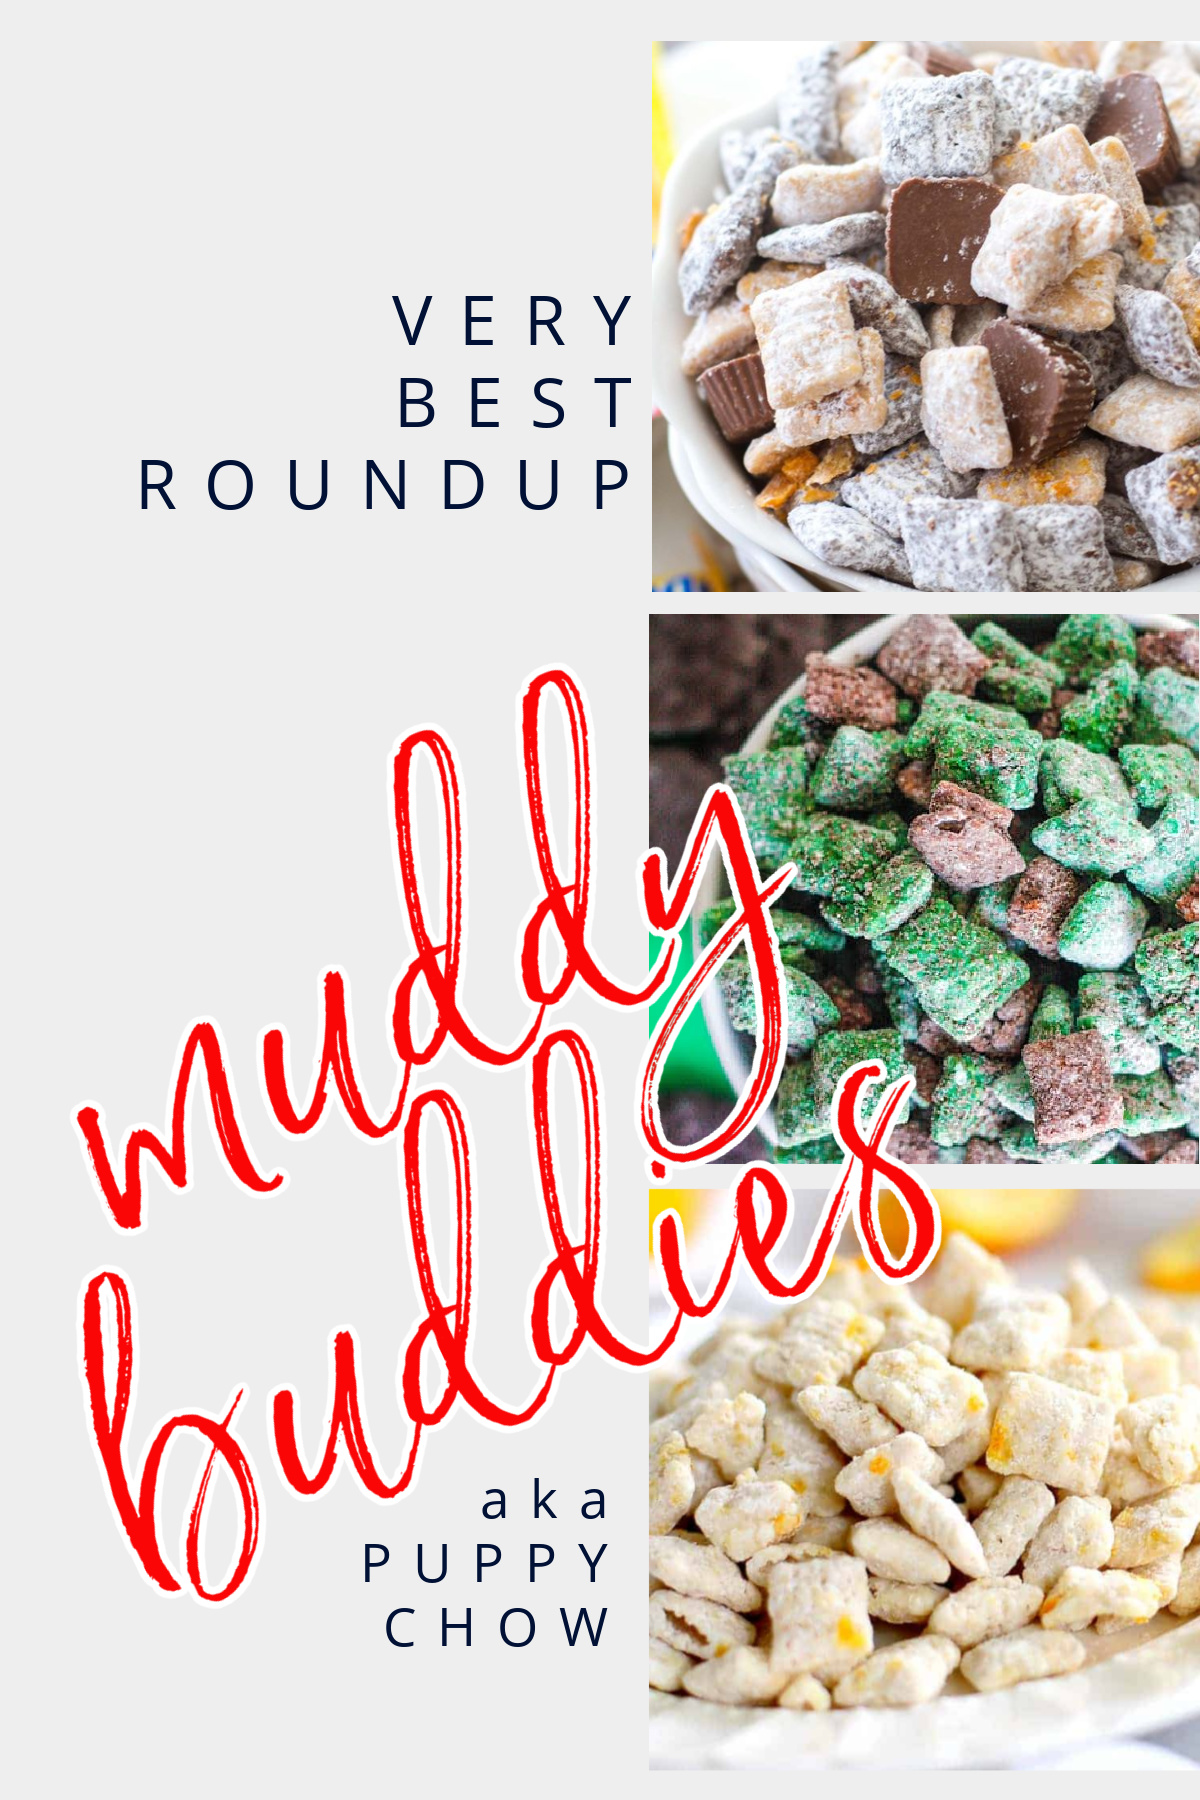 Super Easy Muddy Buddy Recipes - This is your ultimate guide to Muddy Buddies or Puppy Chow as some people call it!